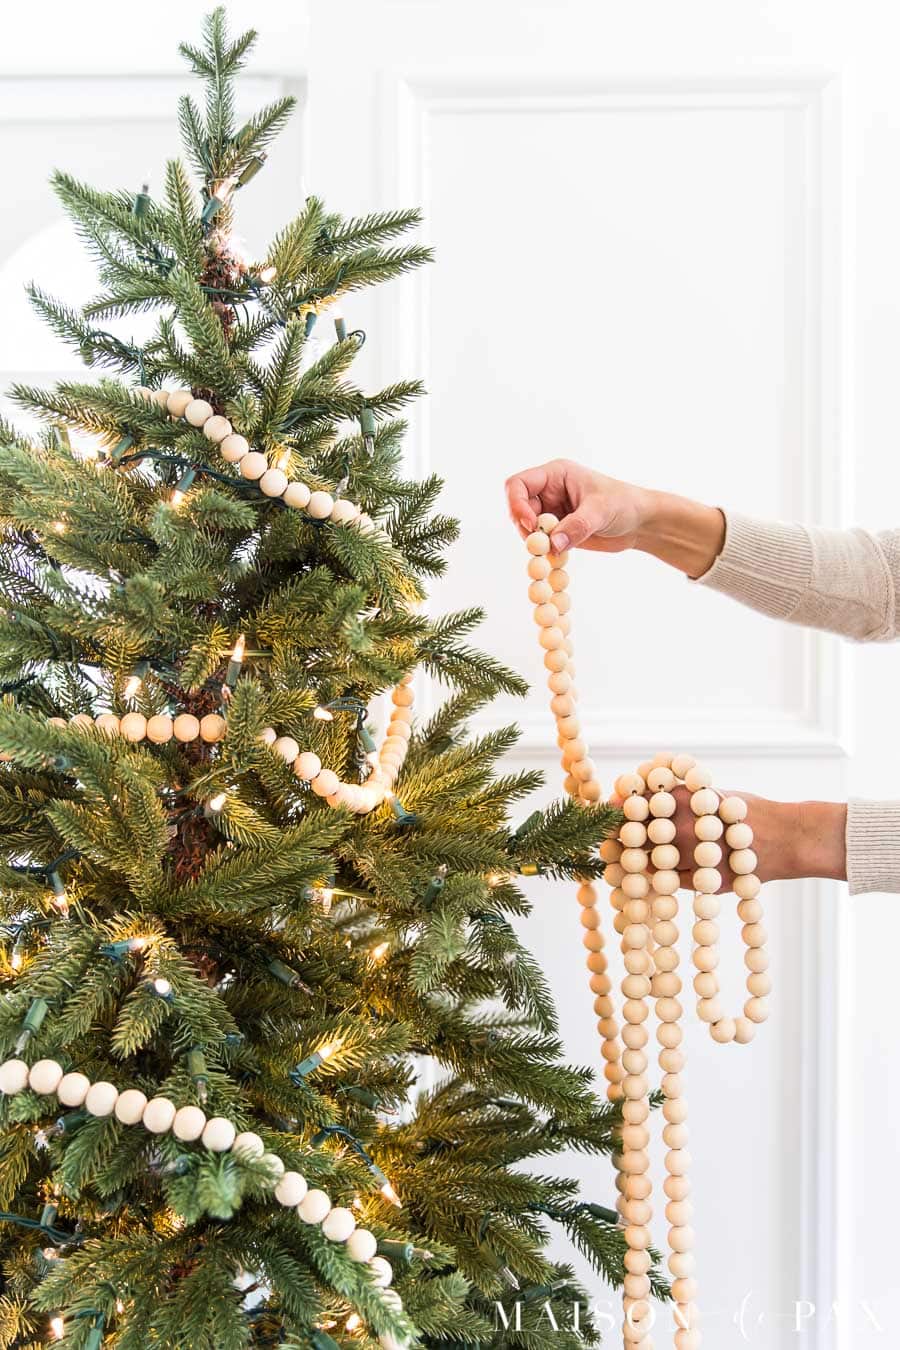 Pretty Wood Beaded Garland Craft For Christmas Tree DecorWooden Beads Garland Craft Projects